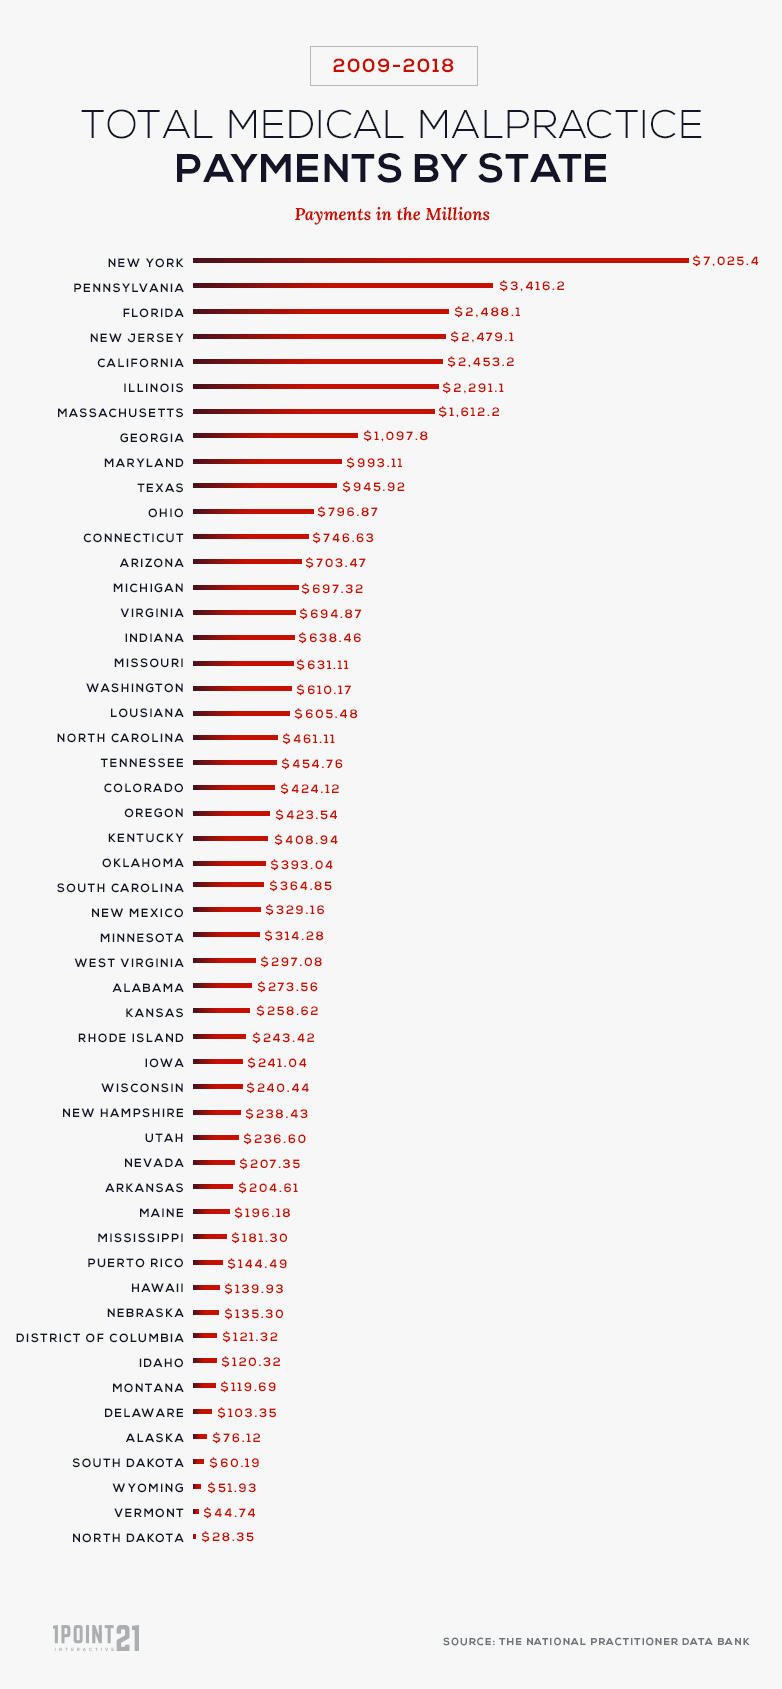 Medical Malpractice Payments by State